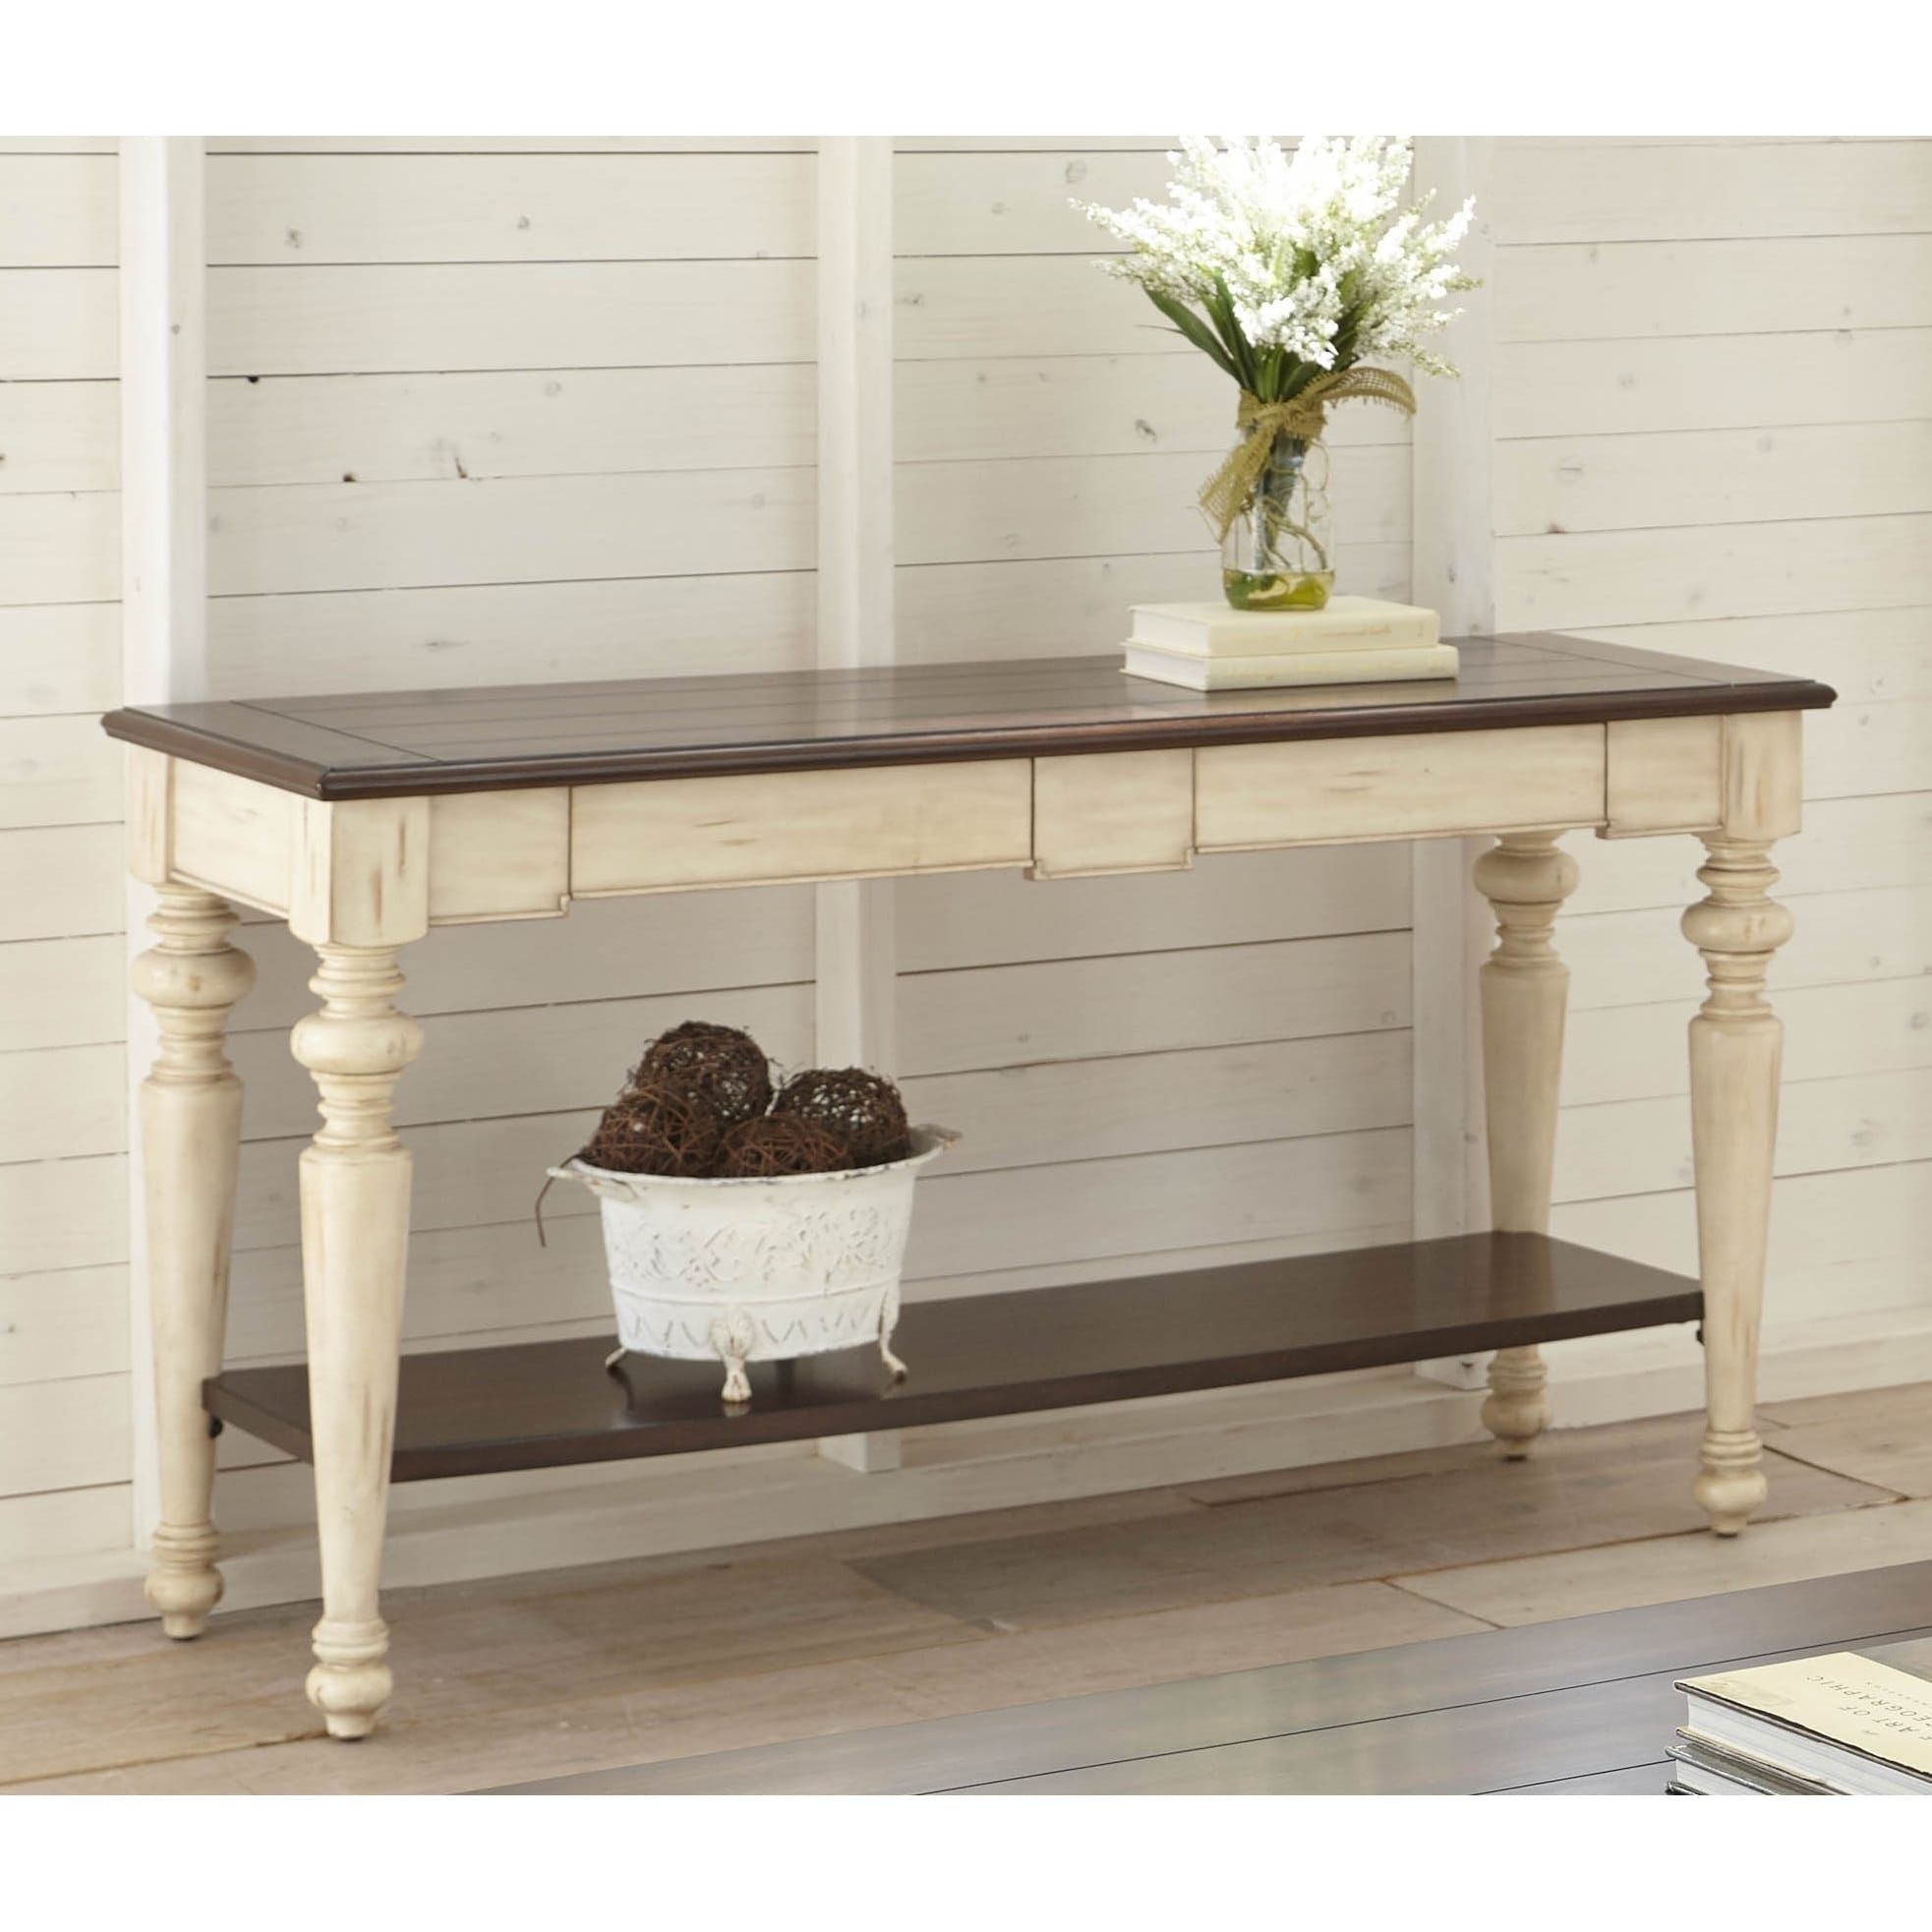 Greyson Living Maison Rouge Waldo Walnut/ Antique White Finish Wood And Intended For Wood Veneer Console Tables (View 2 of 20)